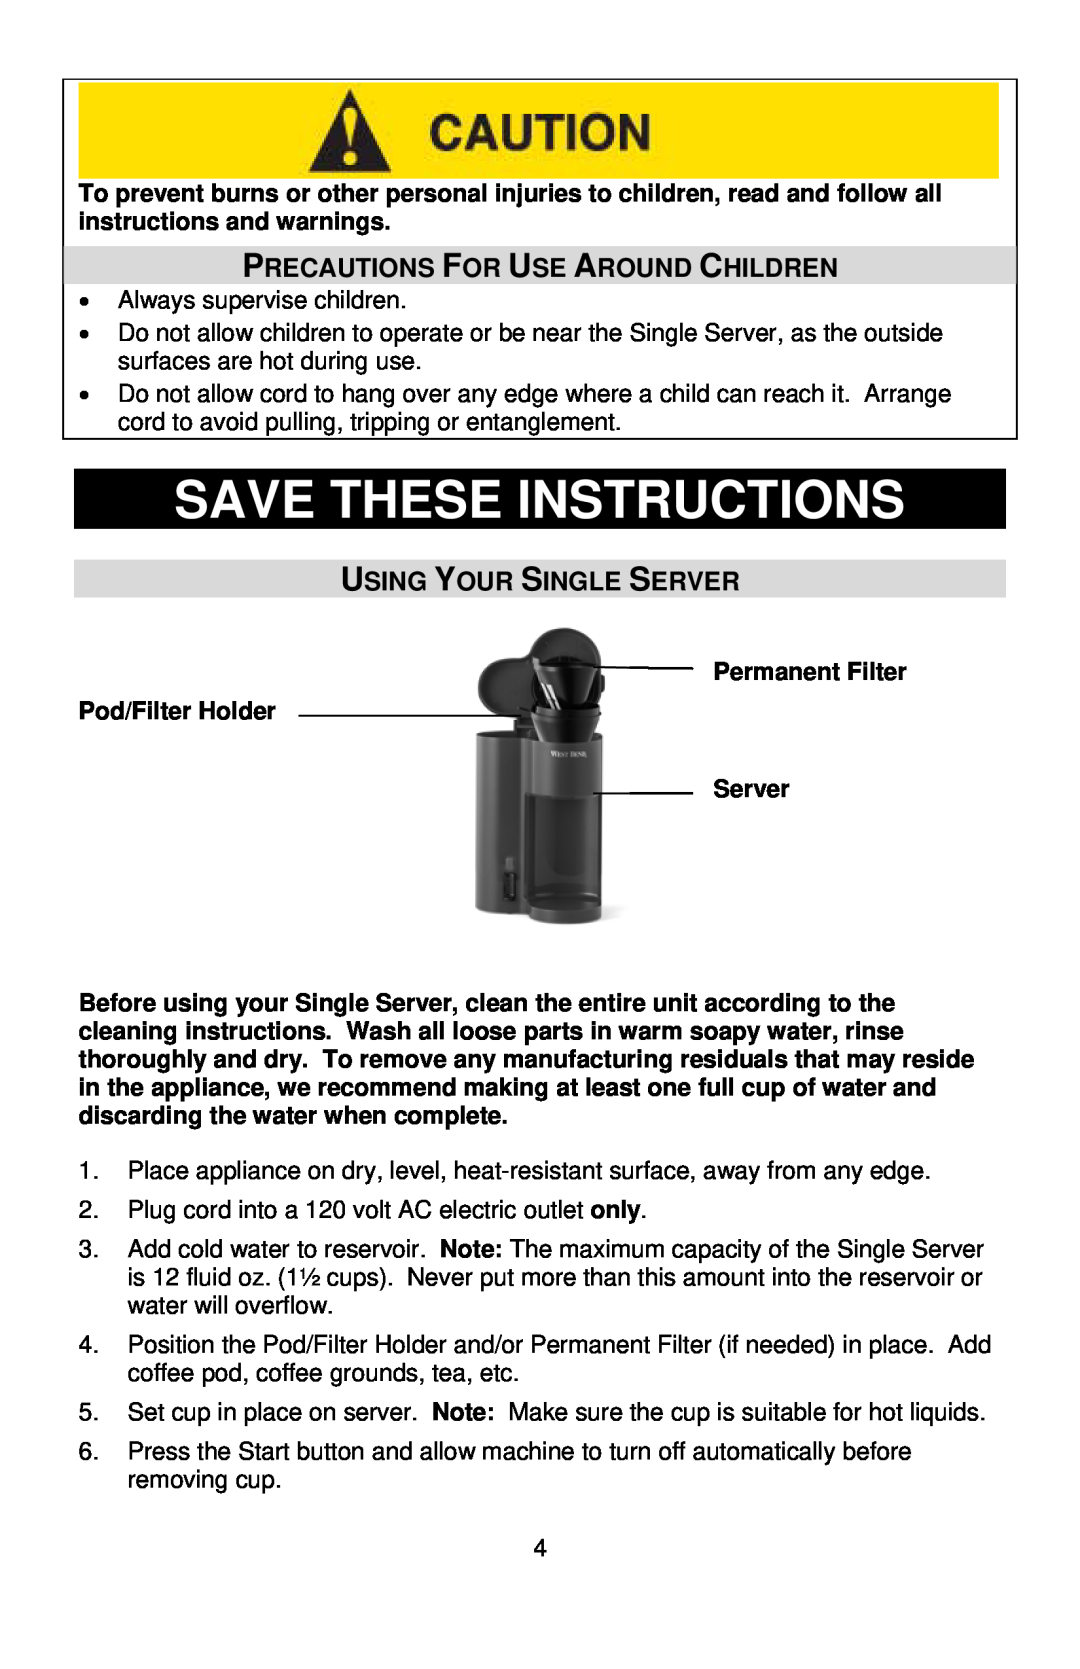 West Bend SINGLE SERVE COFFEEMAKER Save These Instructions, Precautions For Use Around Children, Using Your Single Server 